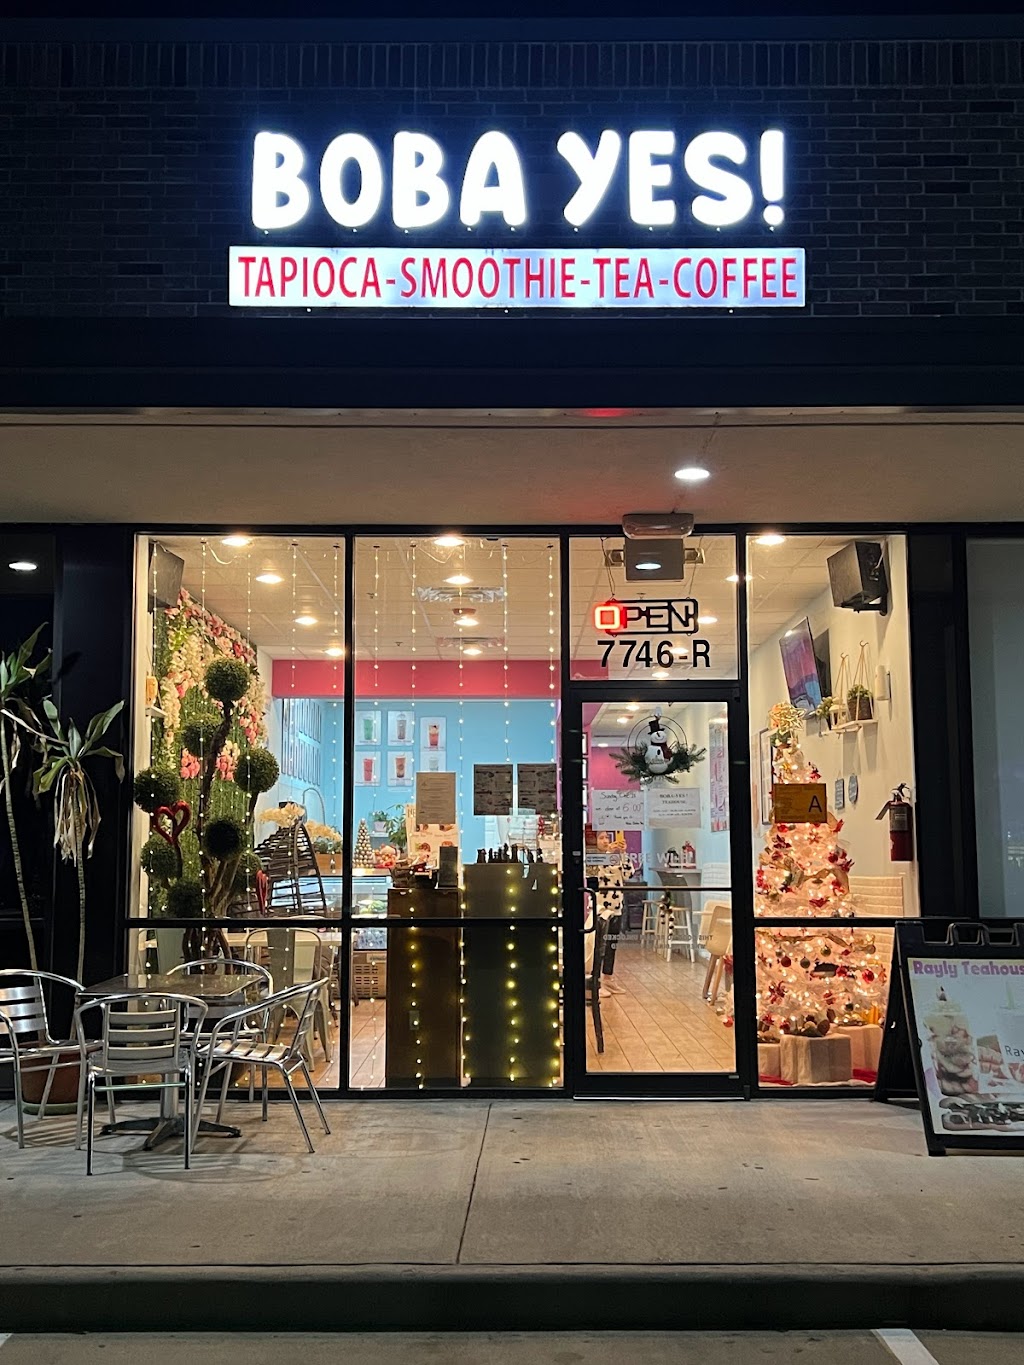 Bobayes Teahouse | 7746 Hwy 6 suite r, Missouri City, TX 77459 | Phone: (281) 969-7509